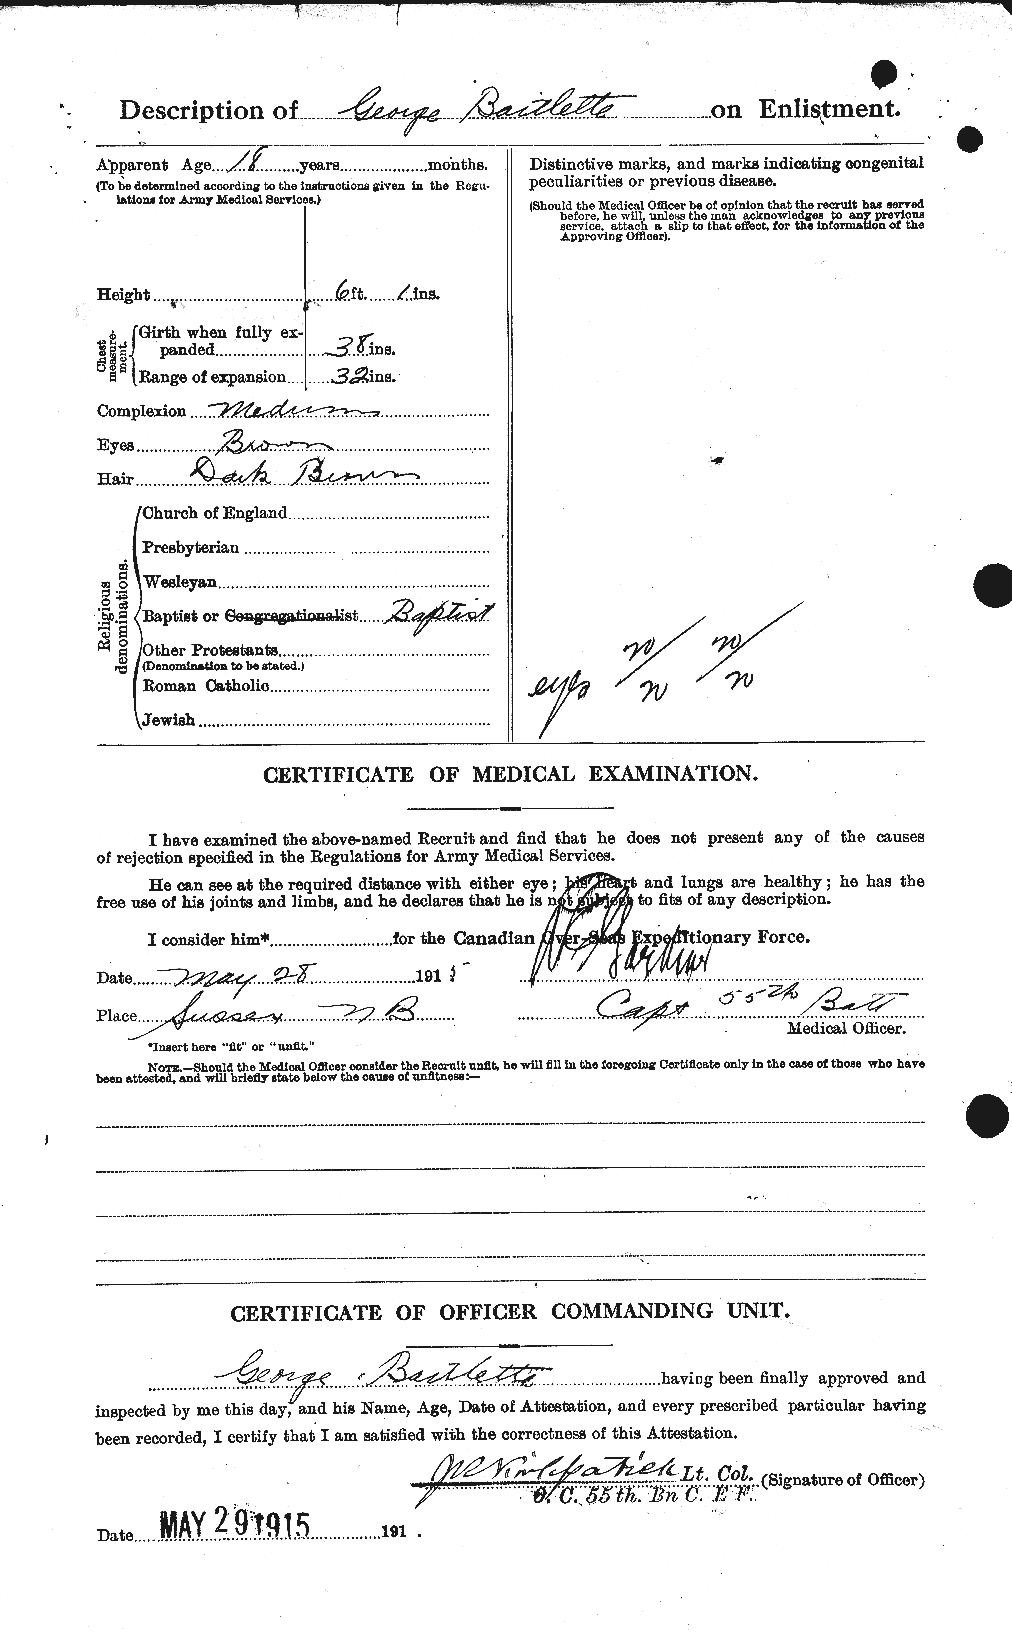 Personnel Records of the First World War - CEF 229367b